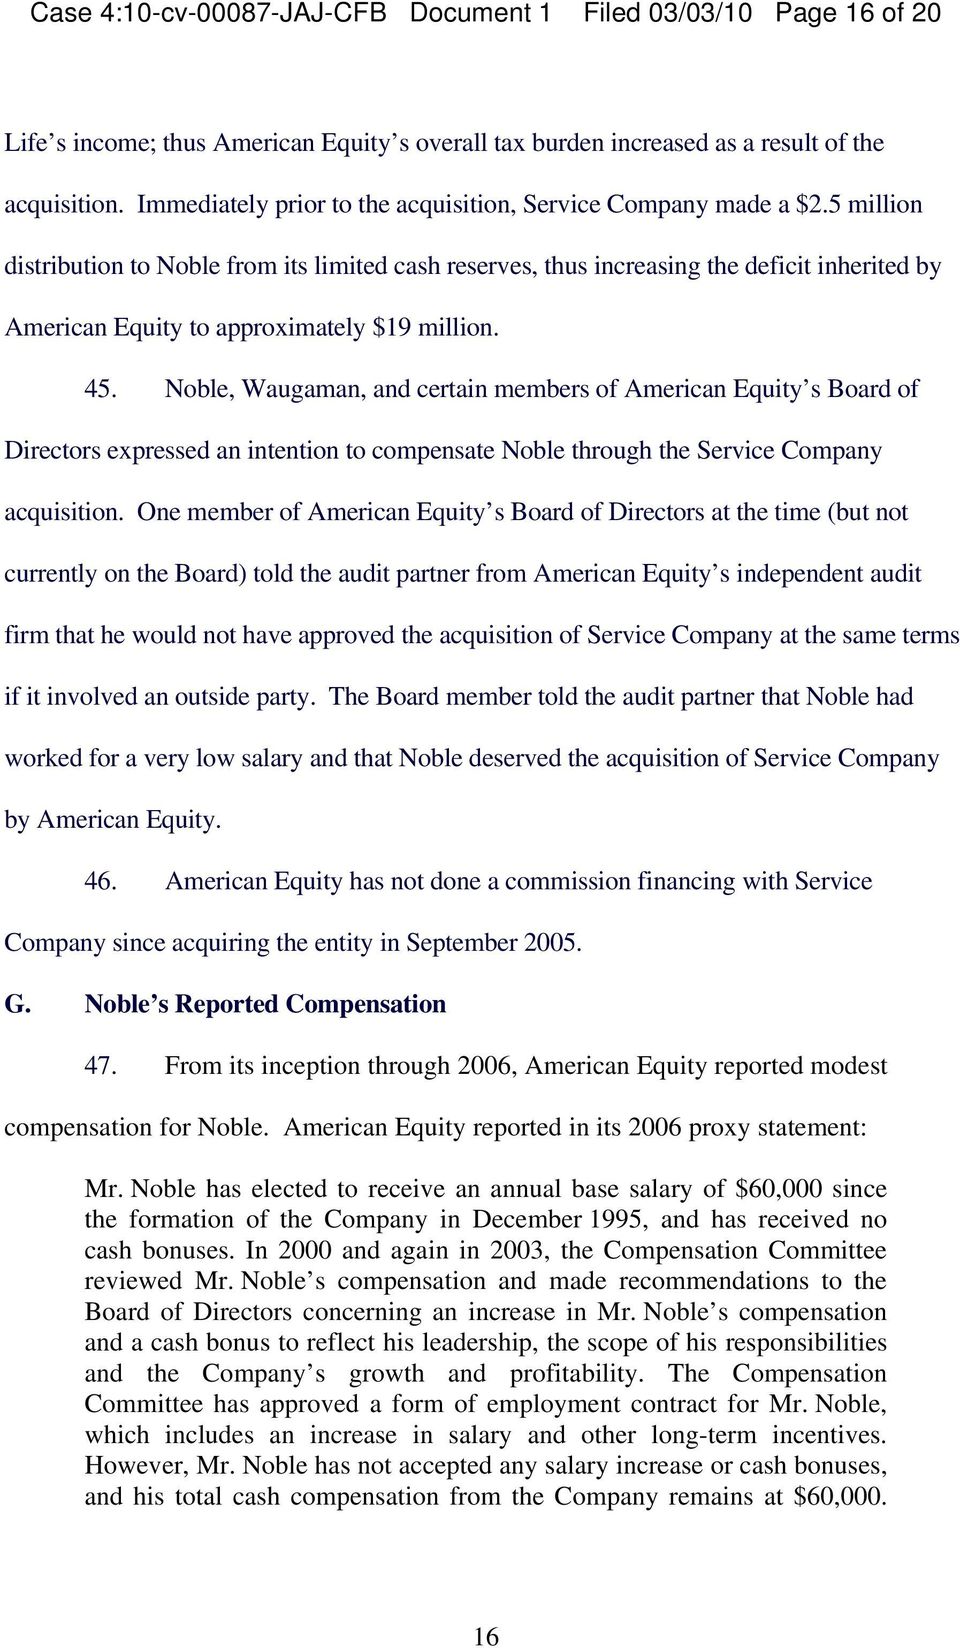 5 million distribution to Noble from its limited cash reserves, thus increasing the deficit inherited by American Equity to approximately $19 million. 45.